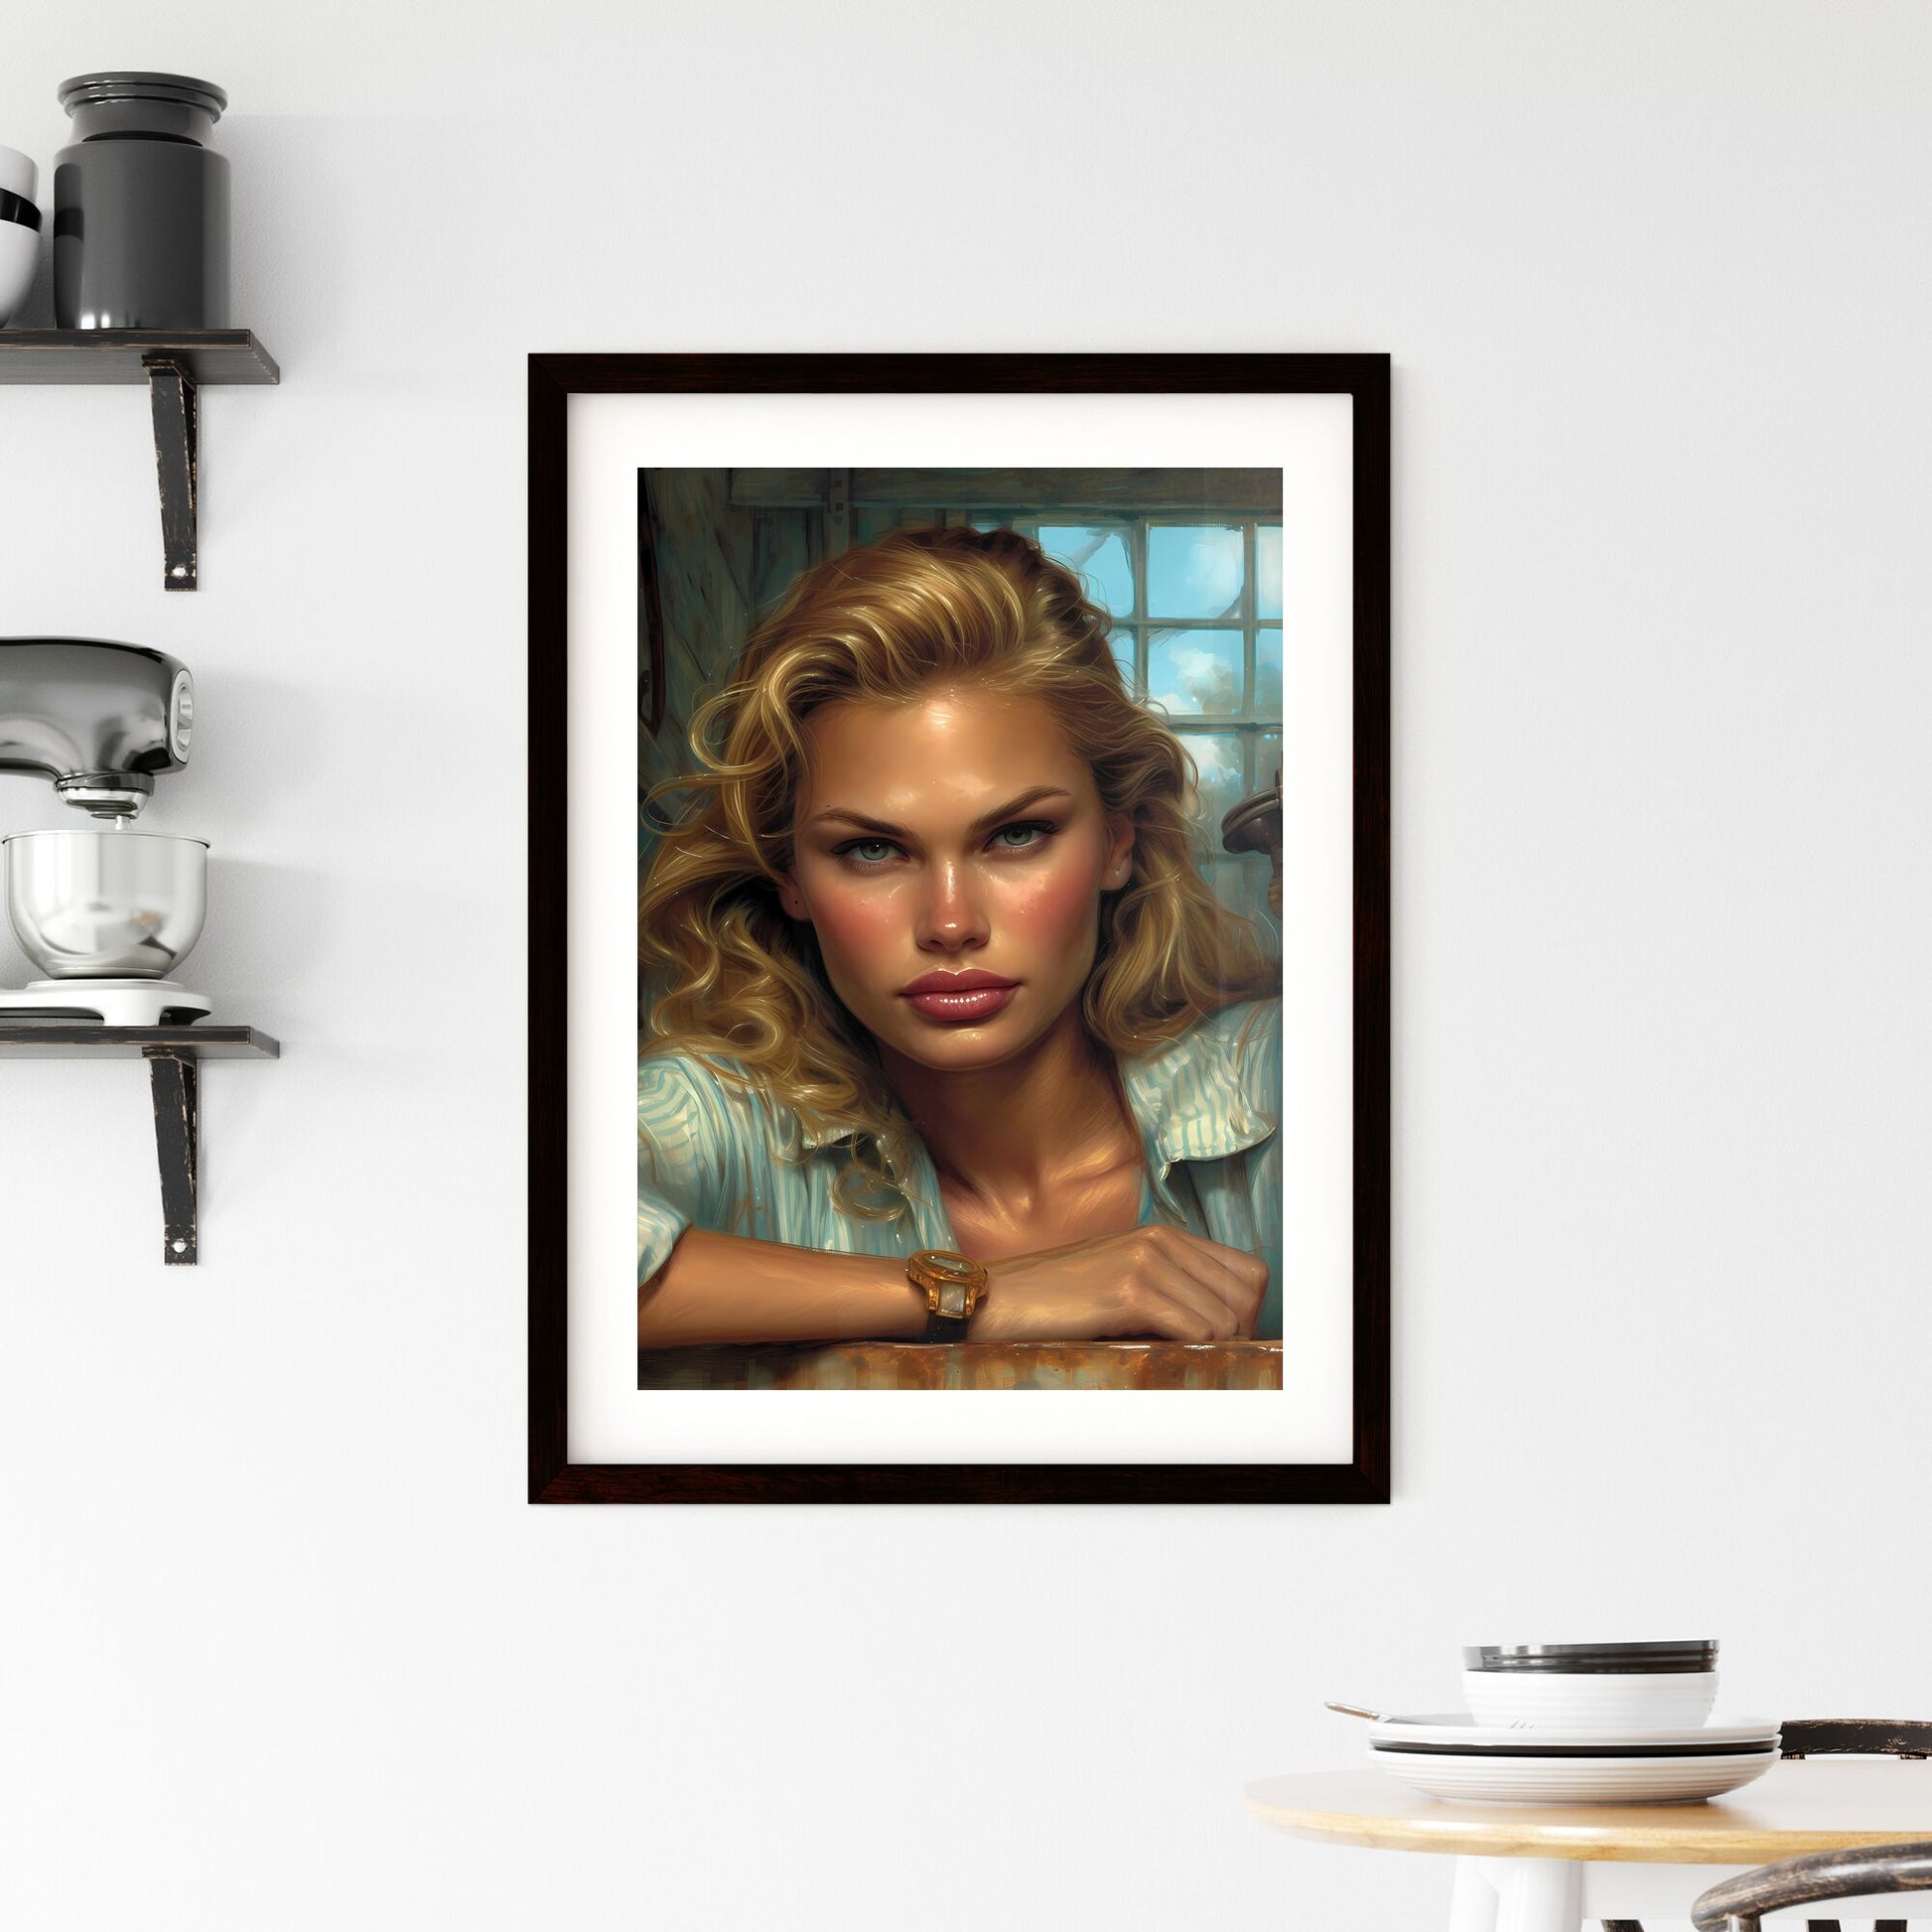 The vintage pin up girl, car engineering worker - Art print of a woman with blonde hair and a watch Default Title